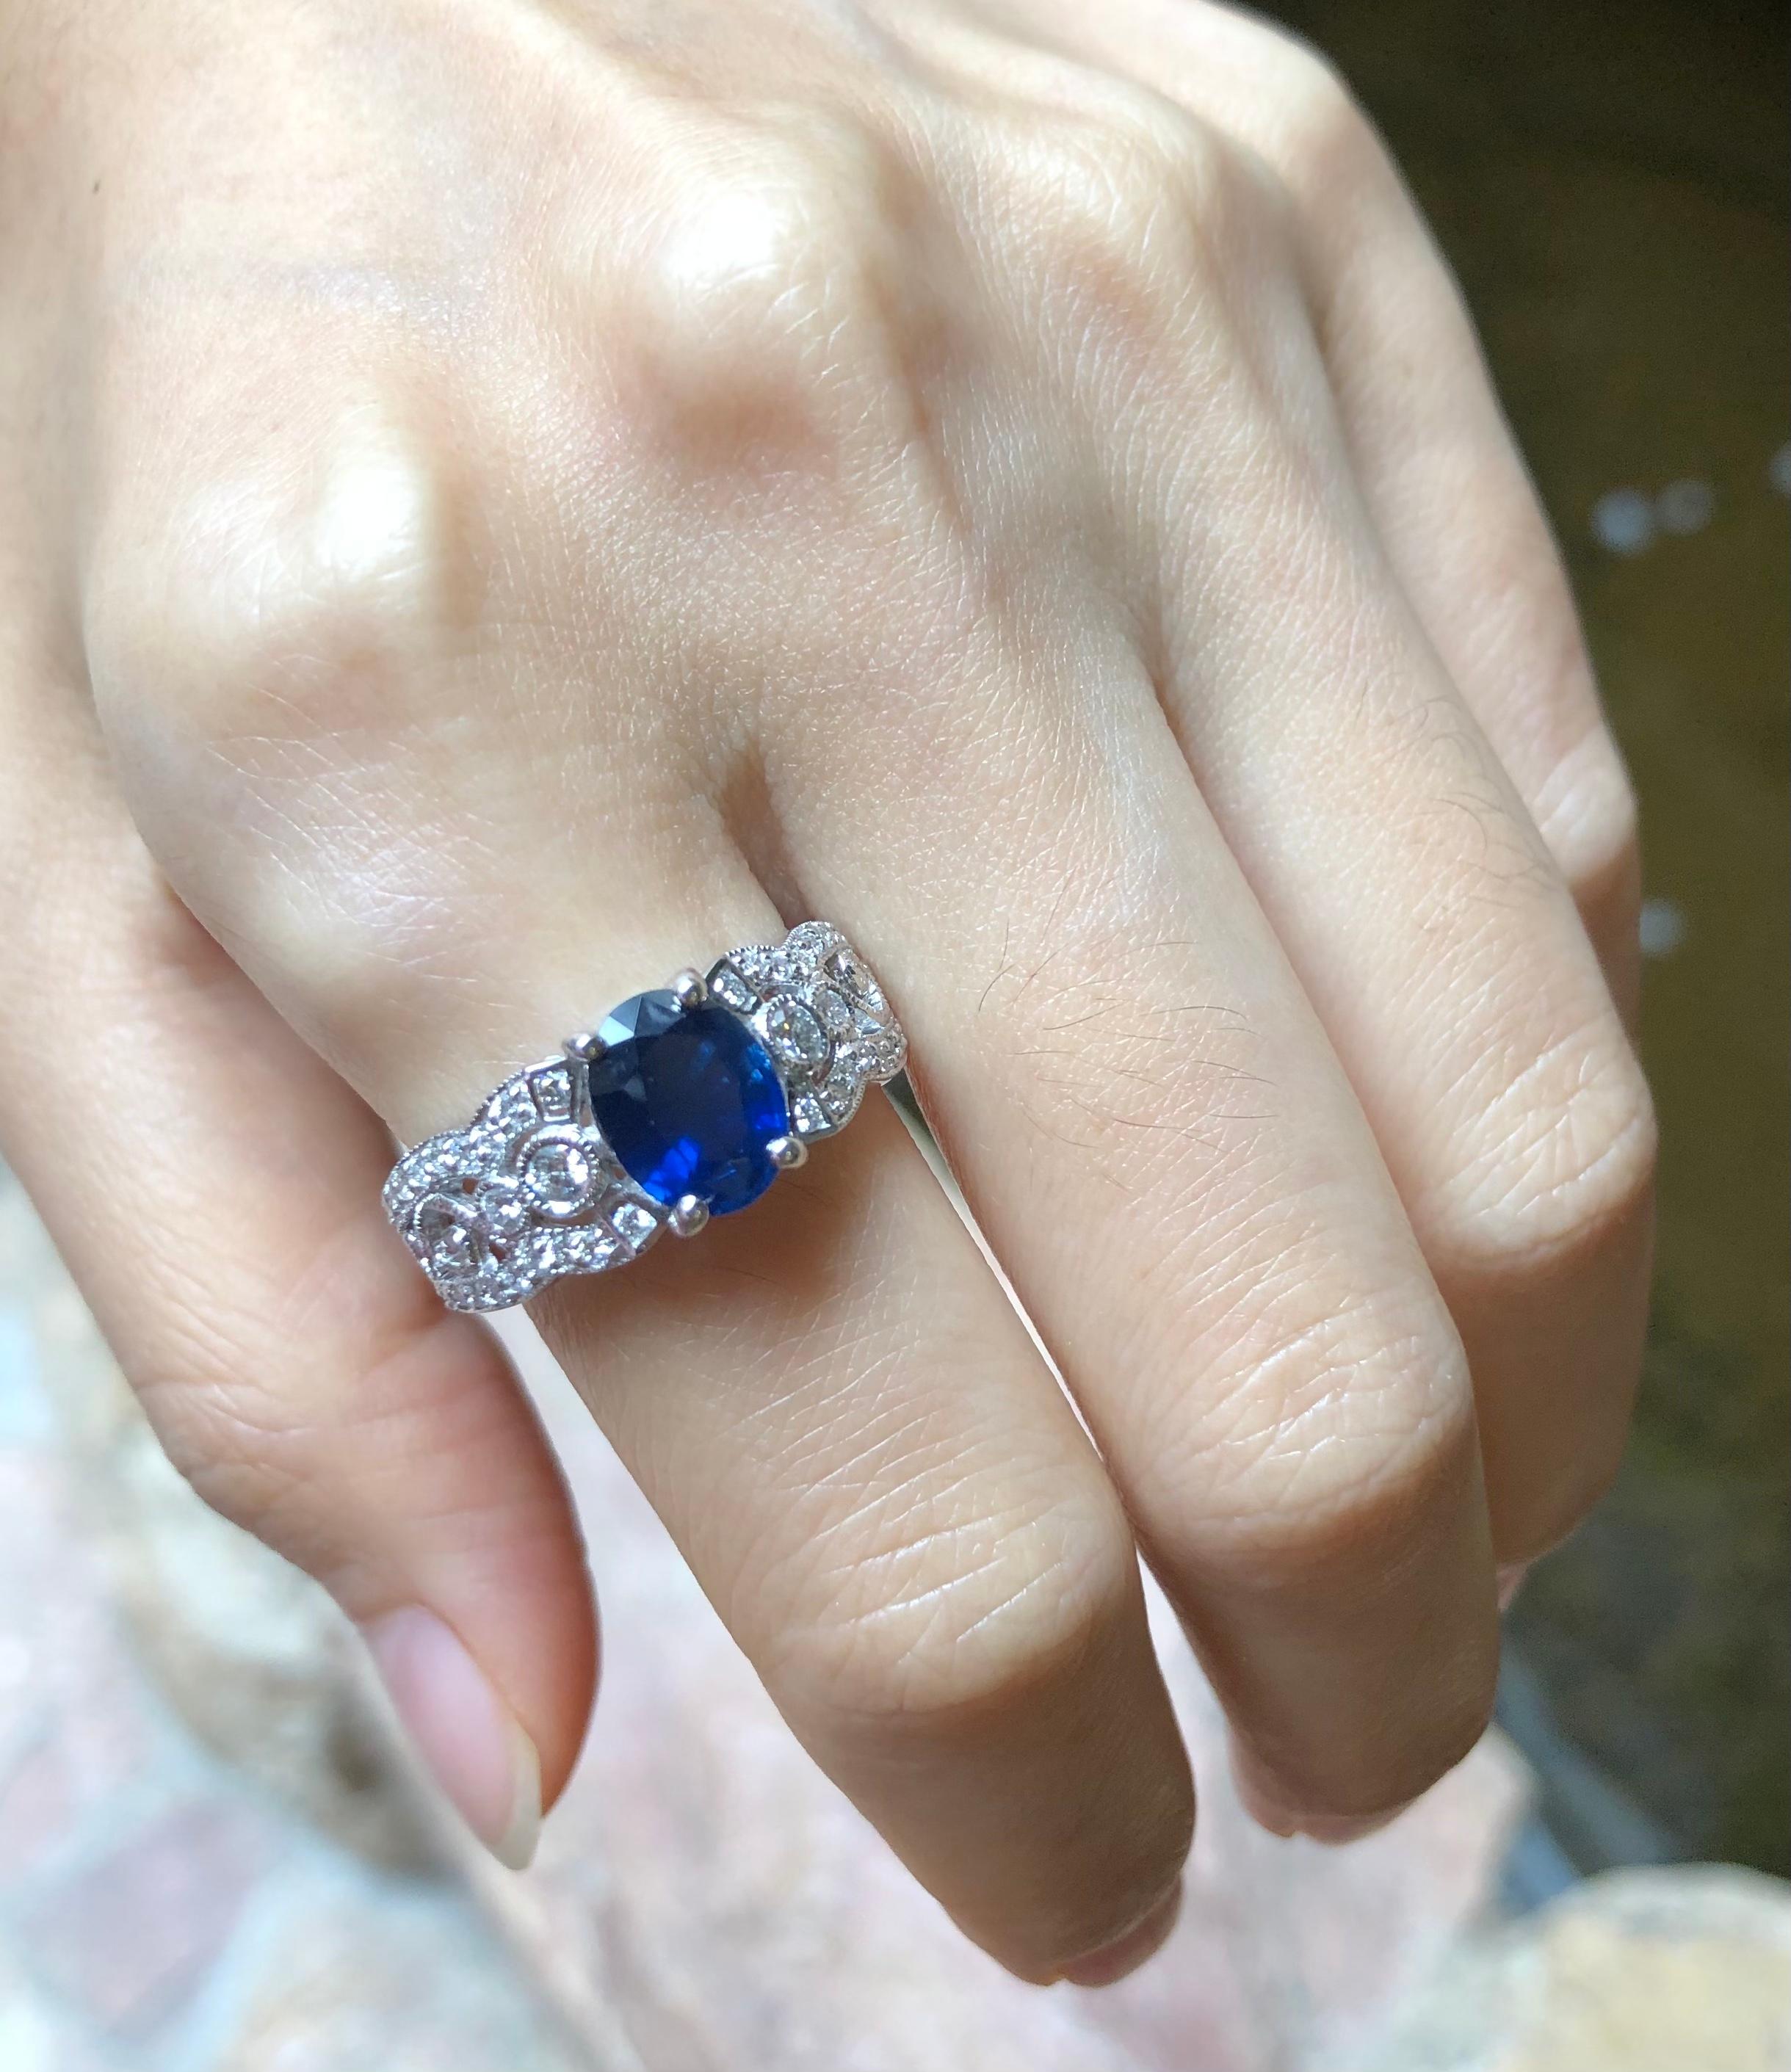 Blue Sapphire 1.82 carats with Diamond 0.49 carat Ring set in 18 Karat White Gold Settings

Width:  0.6 cm 
Length:  0.9 cm
Ring Size: 56
Total Weight: 6.37 grams

